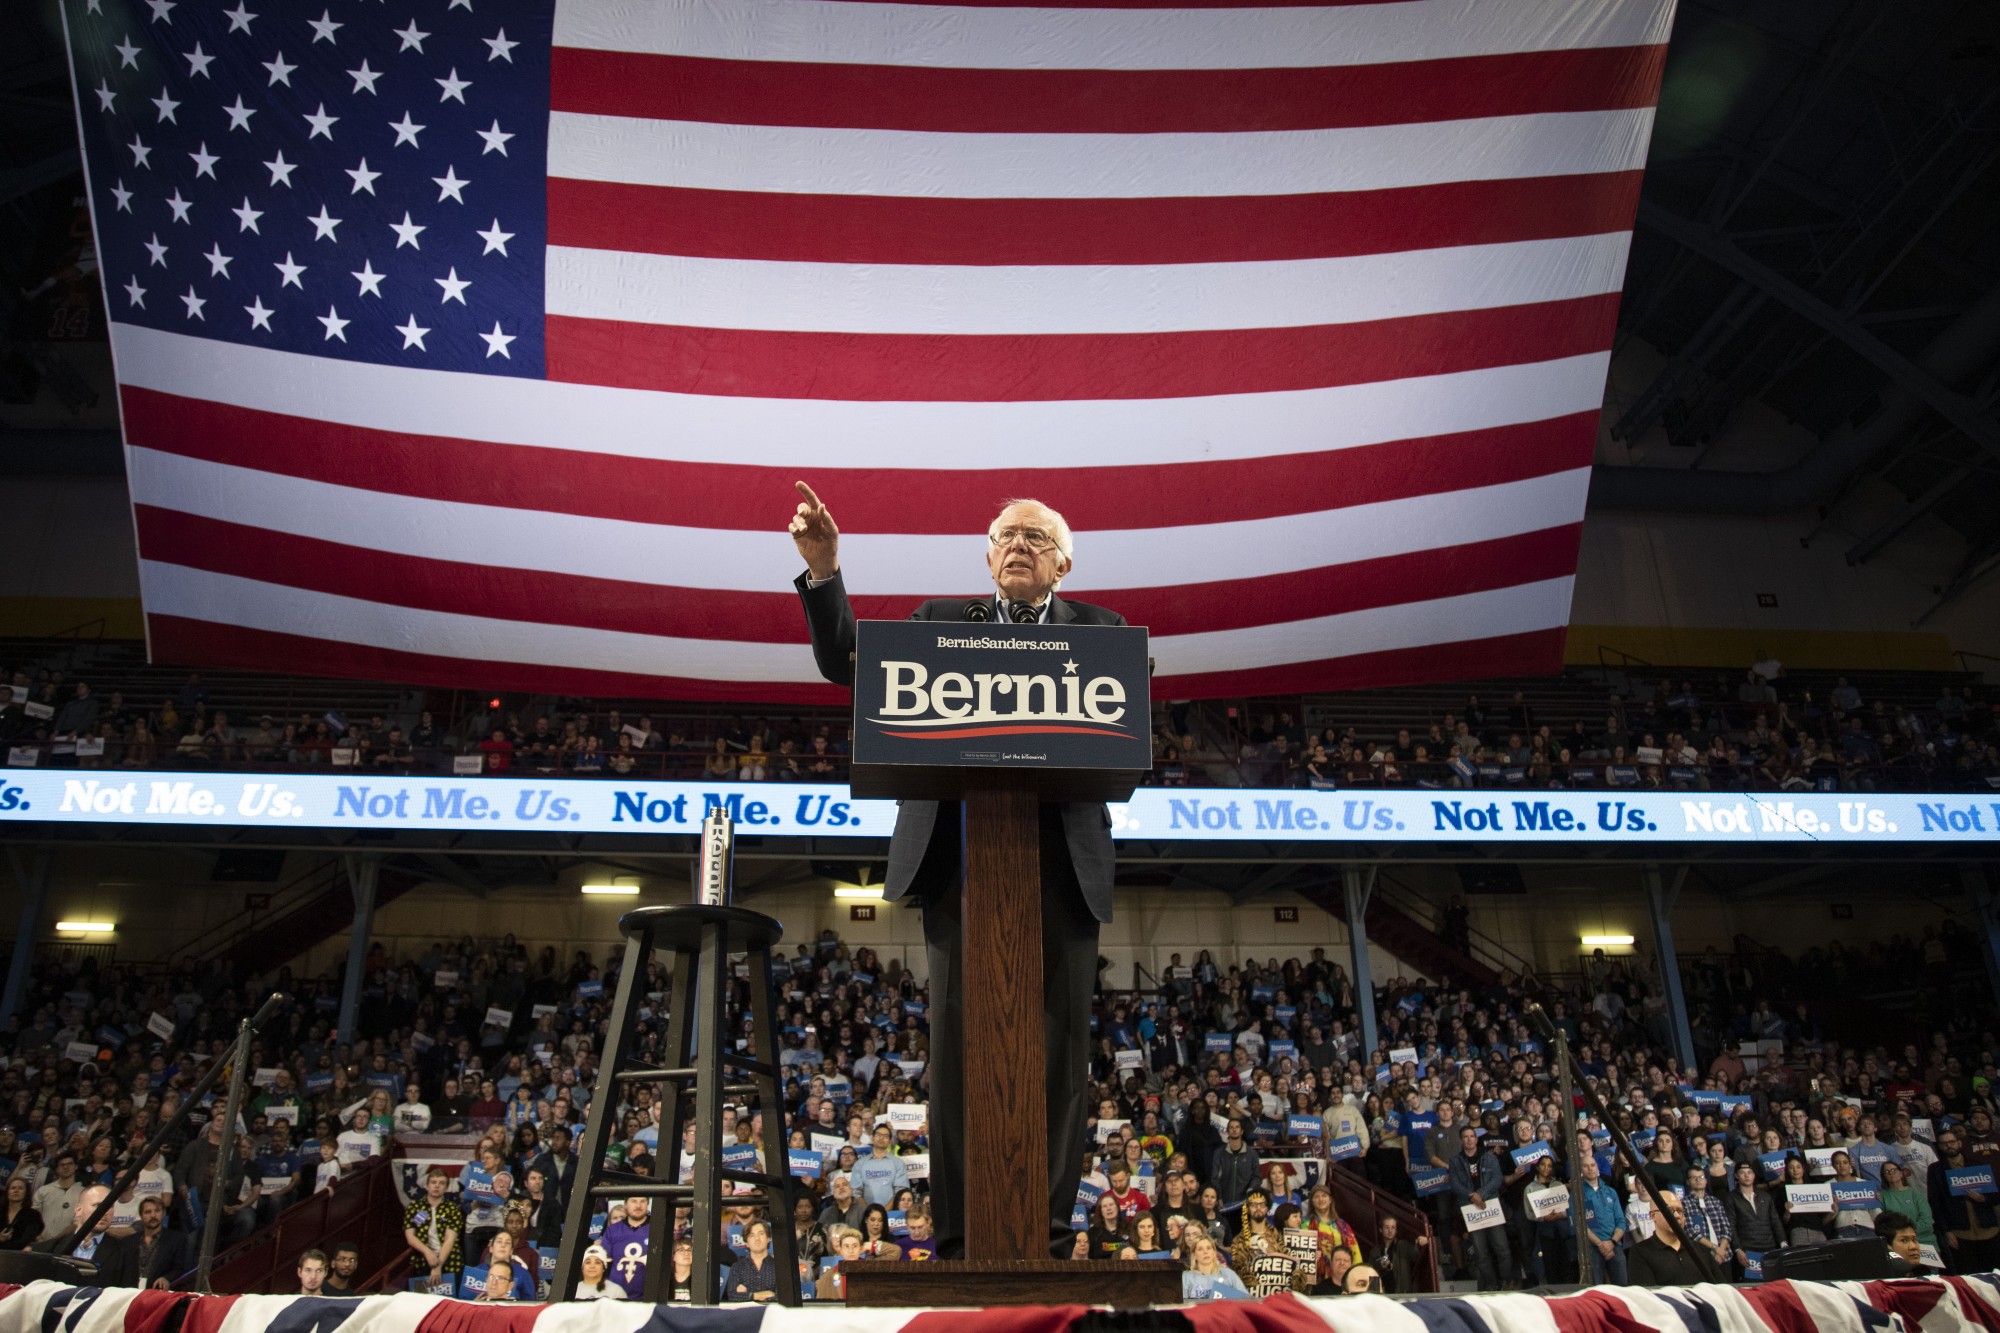 Sen. Bernie Sanders addresses the crowd during a rally held at Williams Arena on Sunday, Nov. 3. 